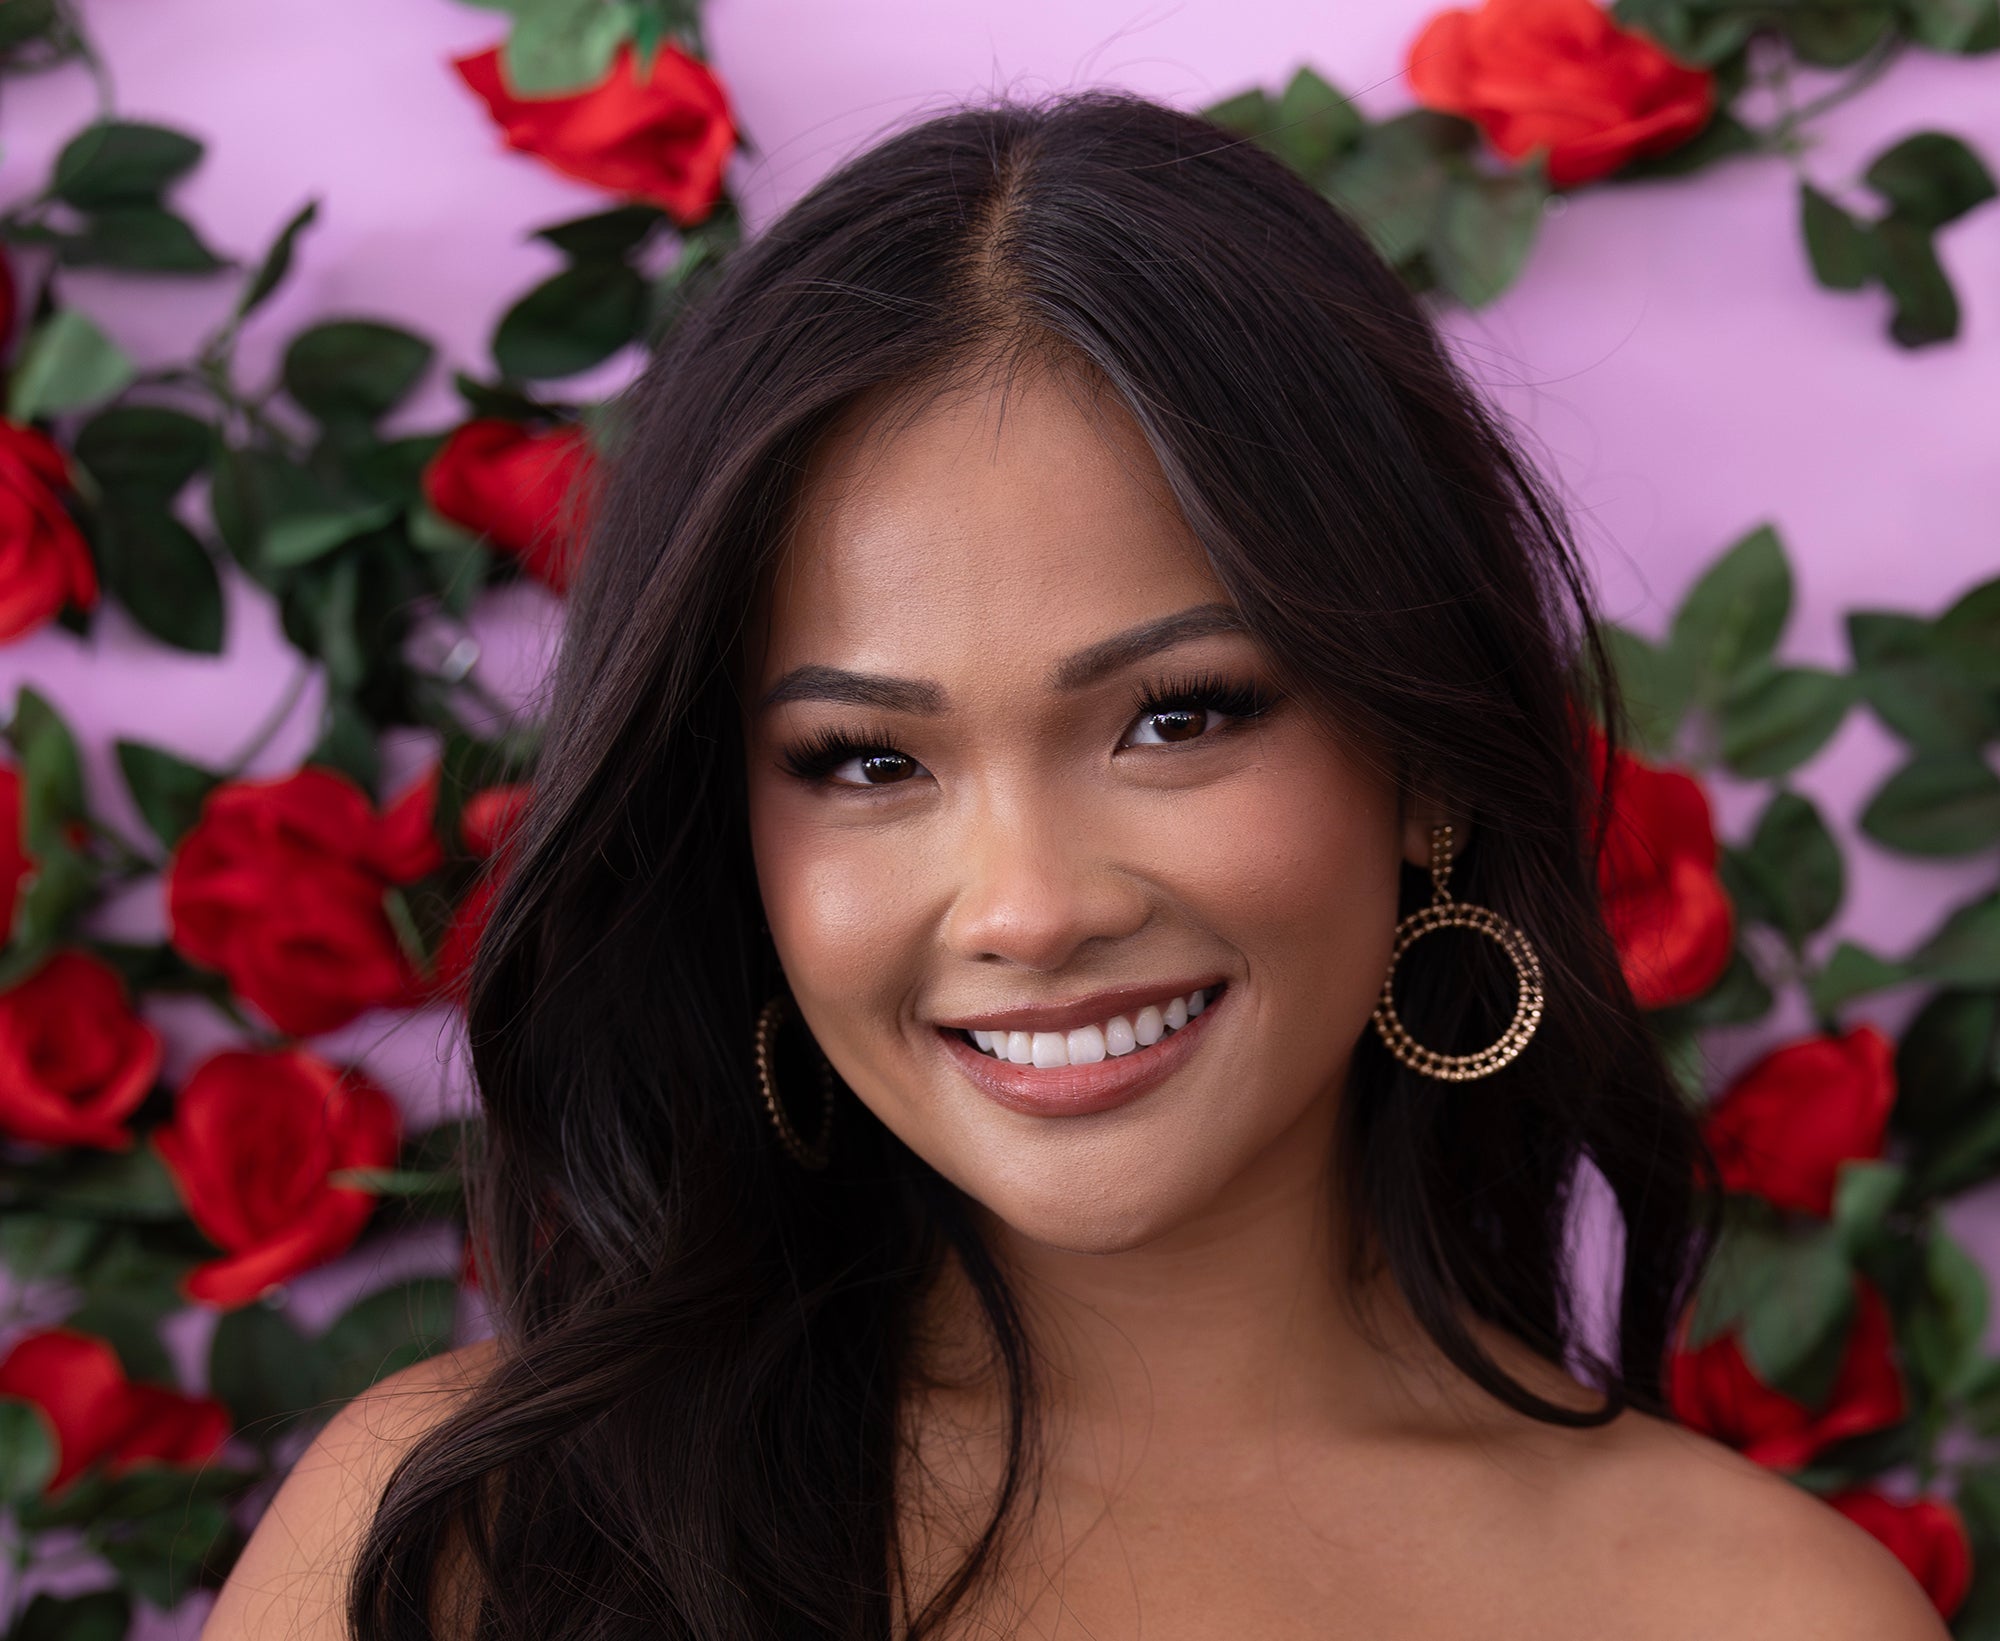 Jenn Tran makes history as the first Asian American lead of The Bachelor franchise